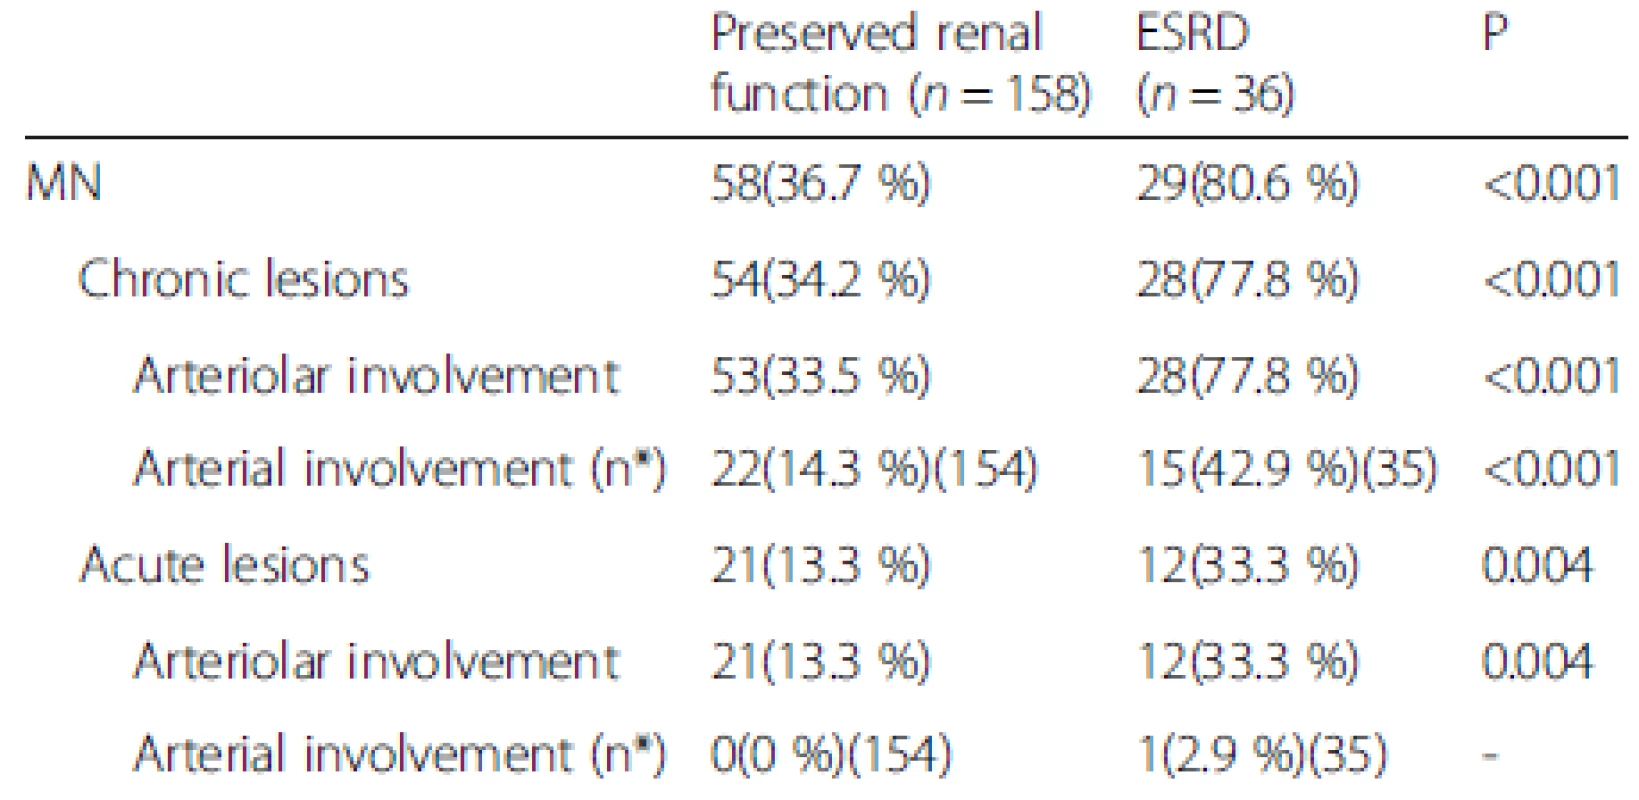 MN lesions and renal outcomes for patients with preserved renal function vs. ESRD